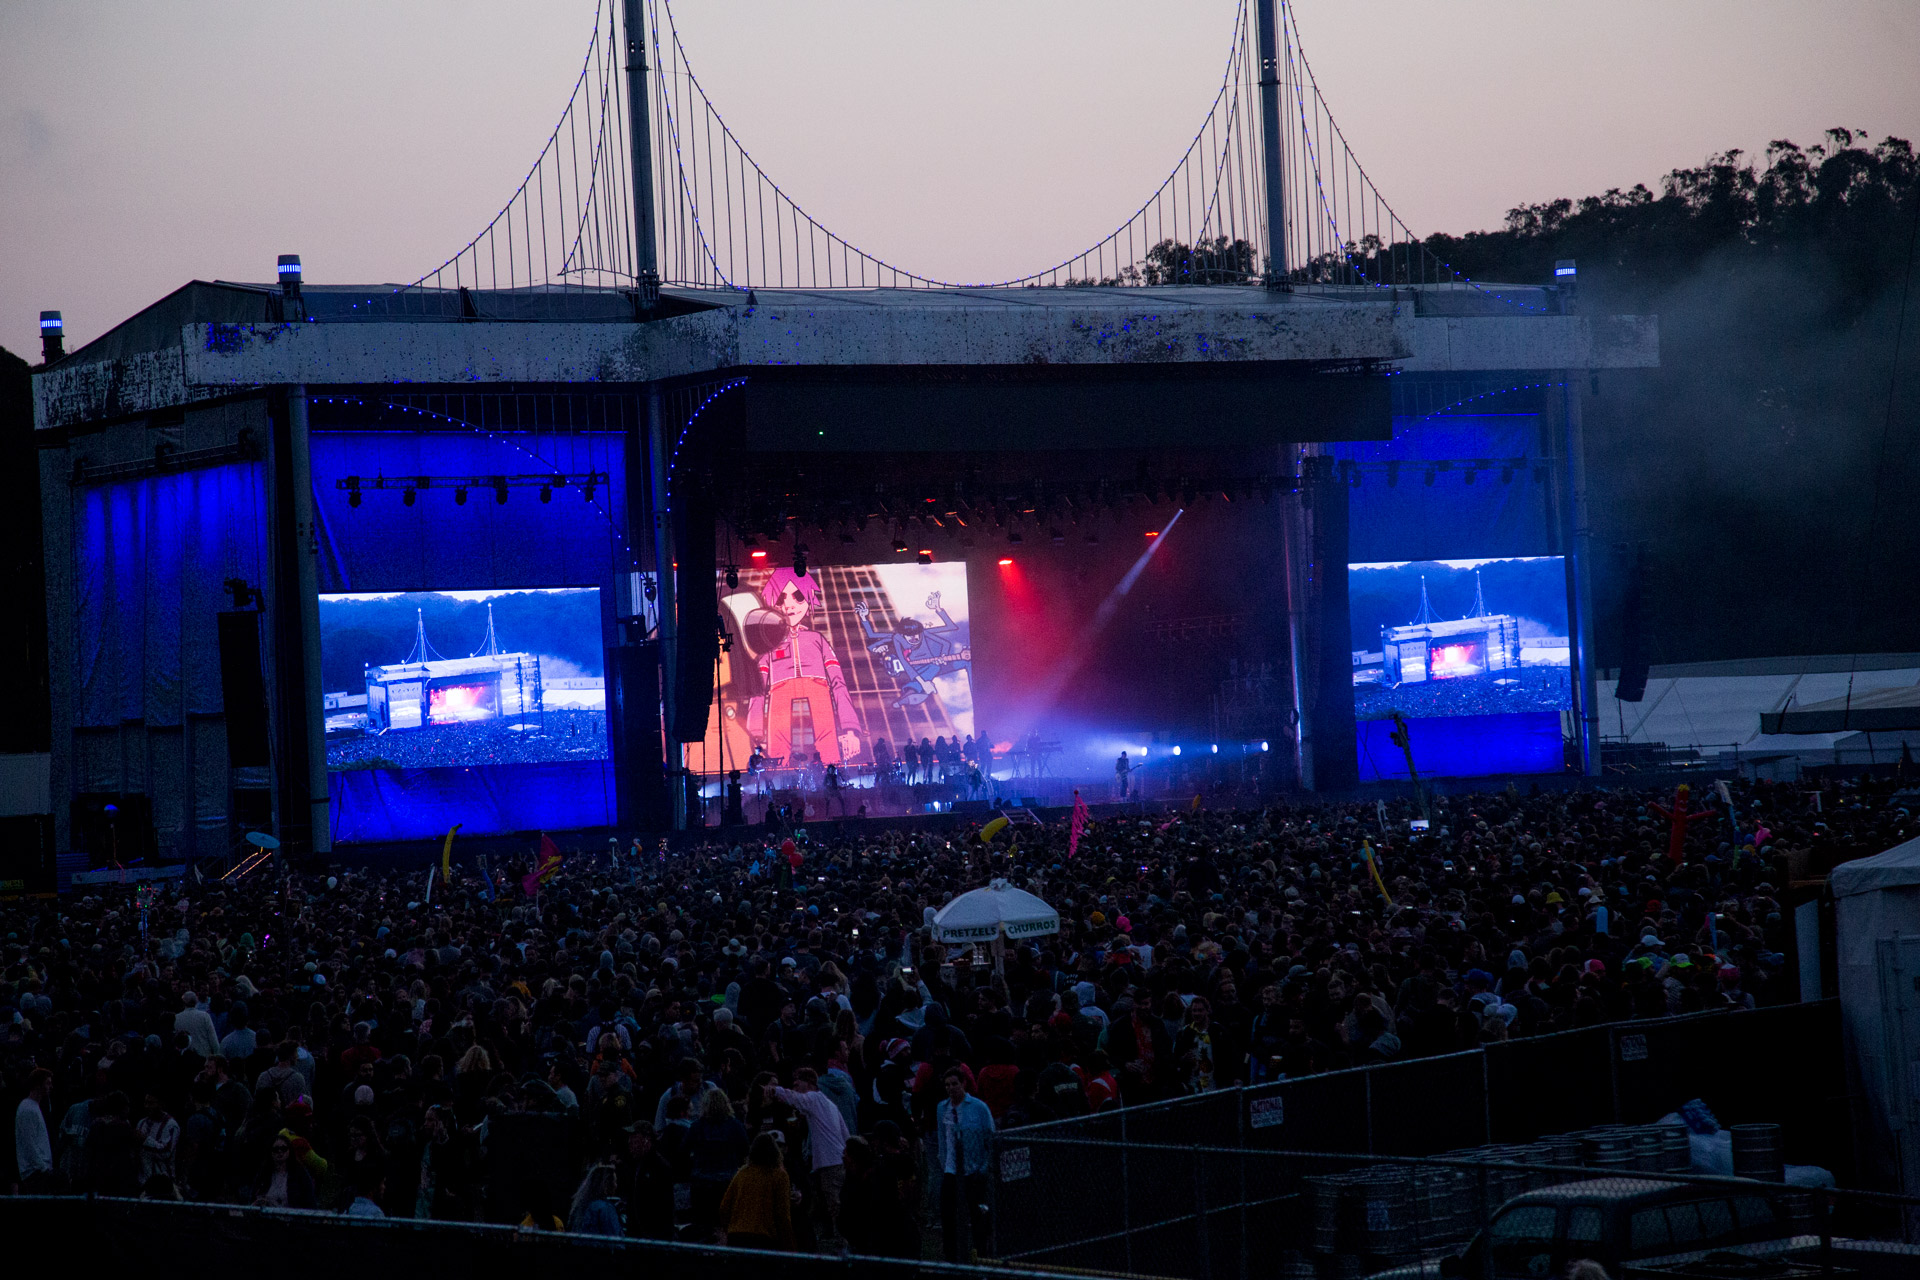 The crowd watch Gorillaz at the Outside Lands music festival in San Francisco, Aug. 11, 2017.